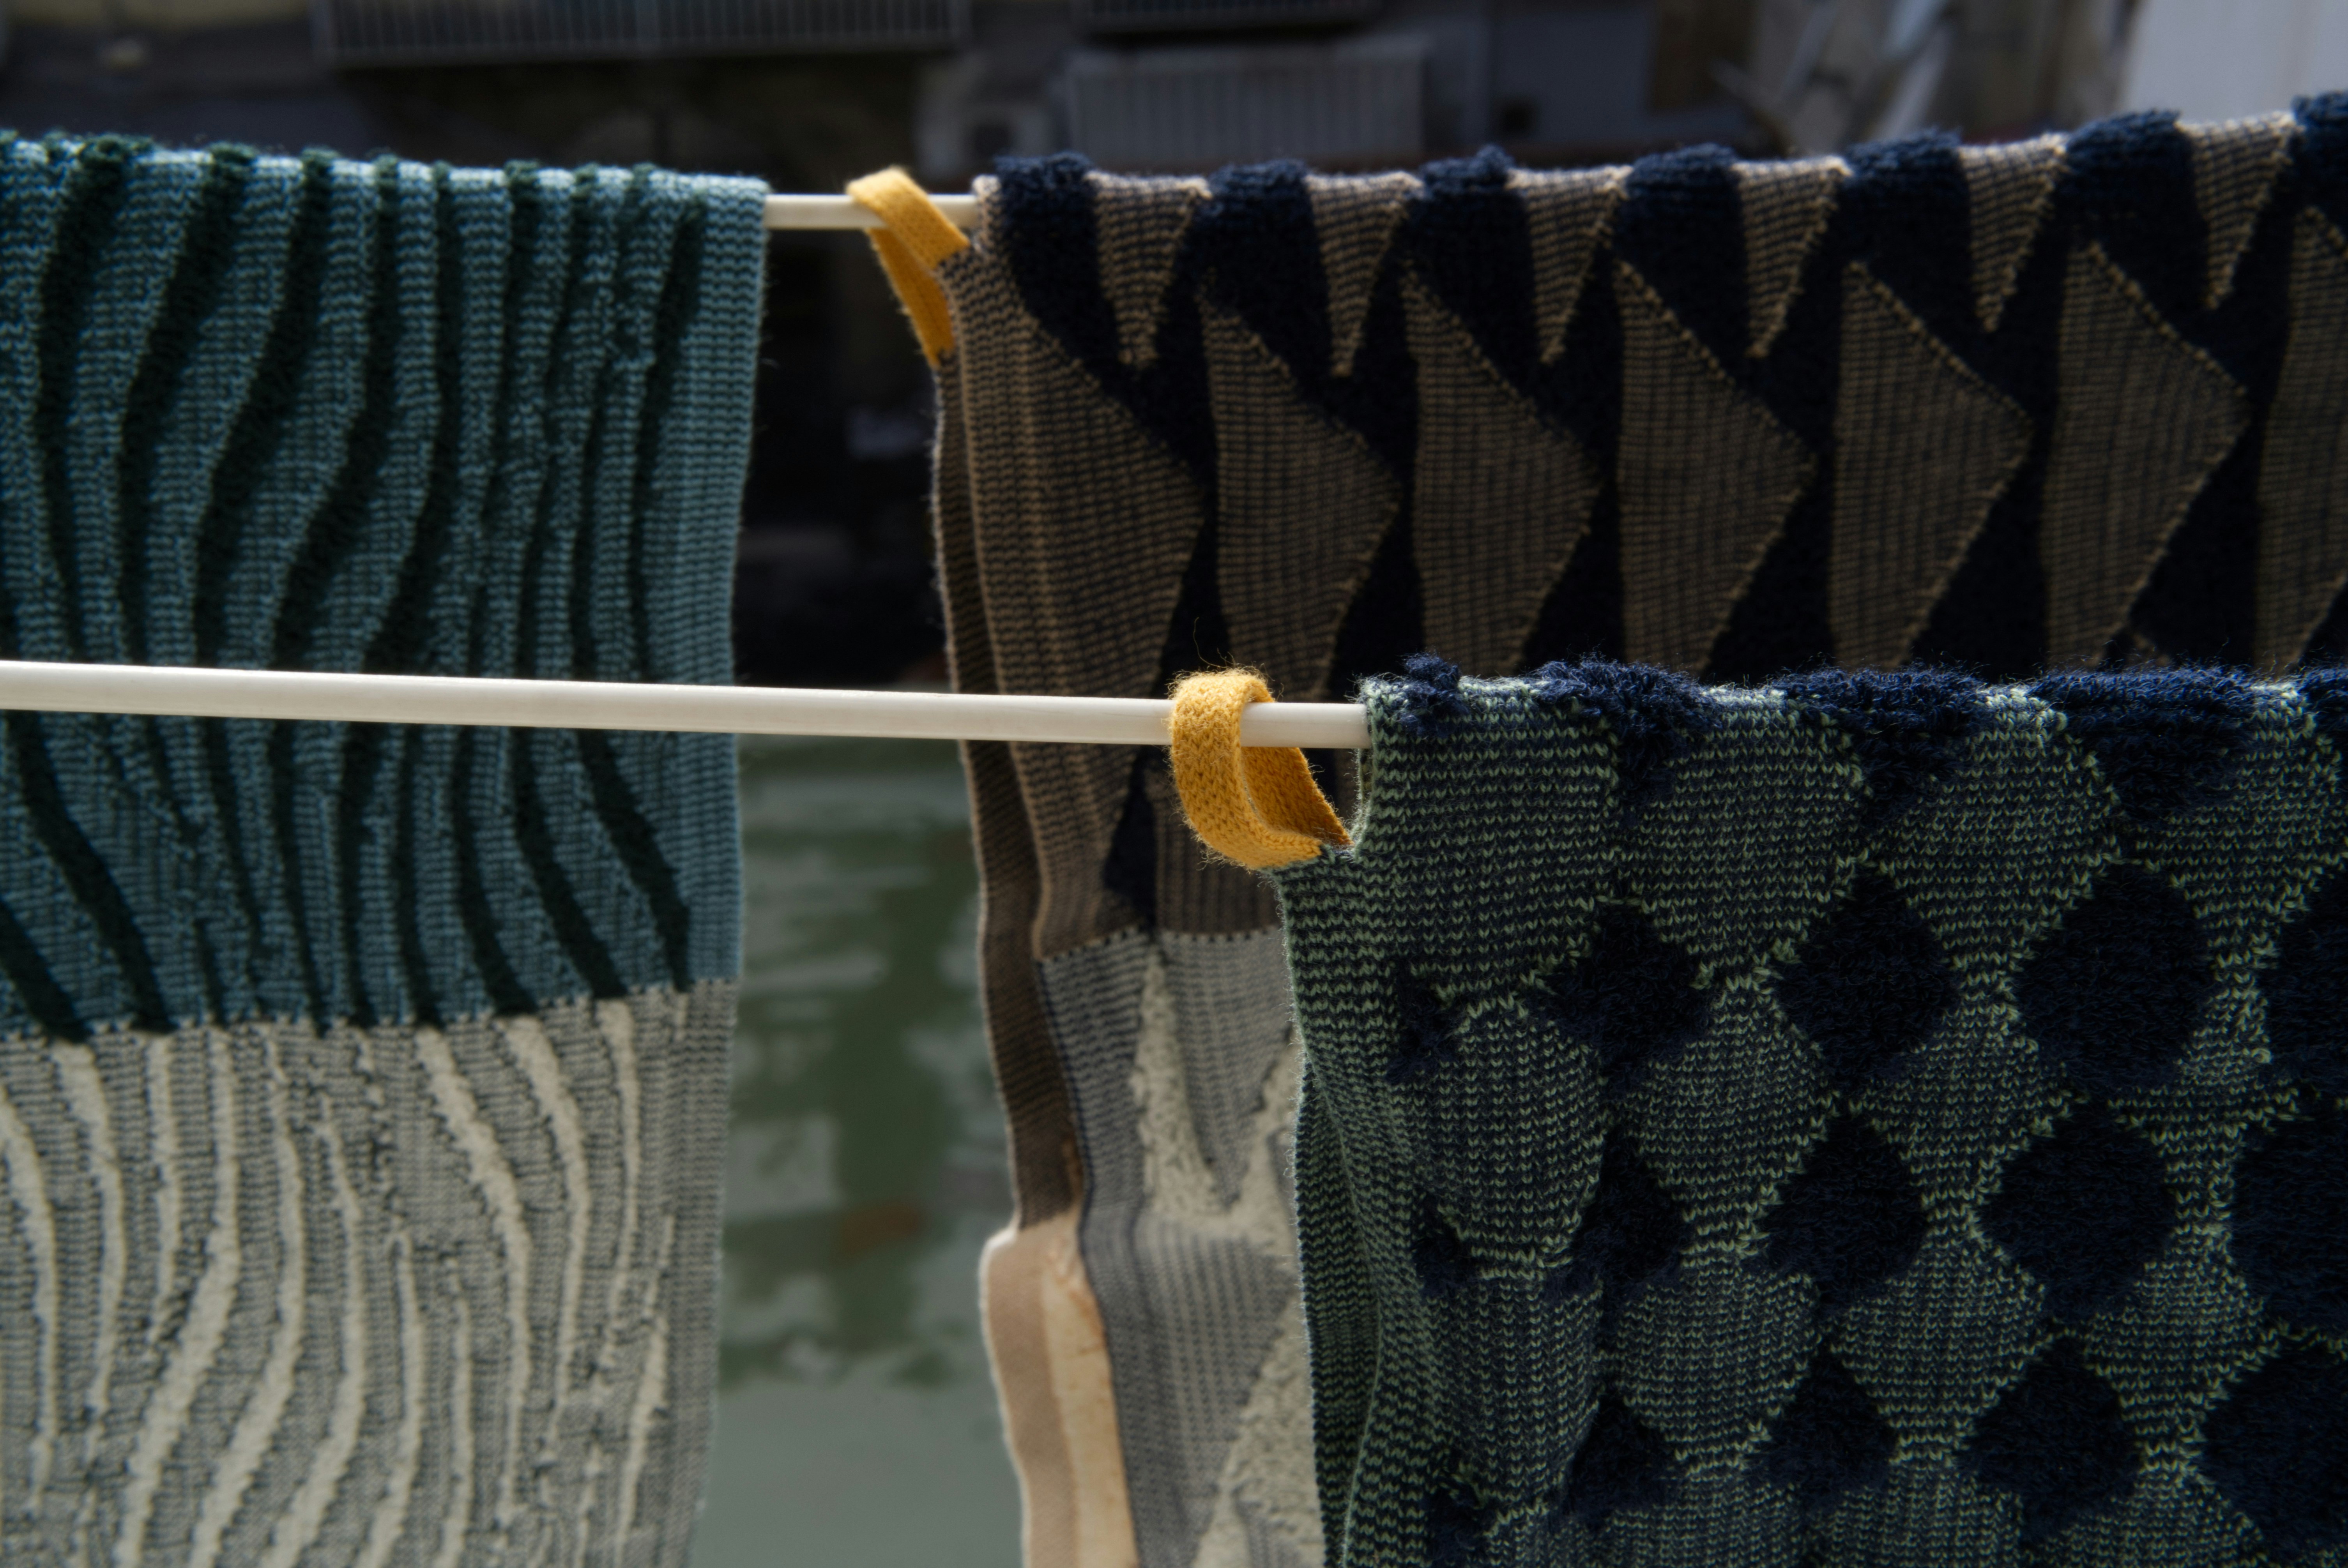 Three knitted towels hanging on lines in the sun. Made in Berlin by Towel.Studio, these towel feature alternating patterns of terry and standard knitted stitches.